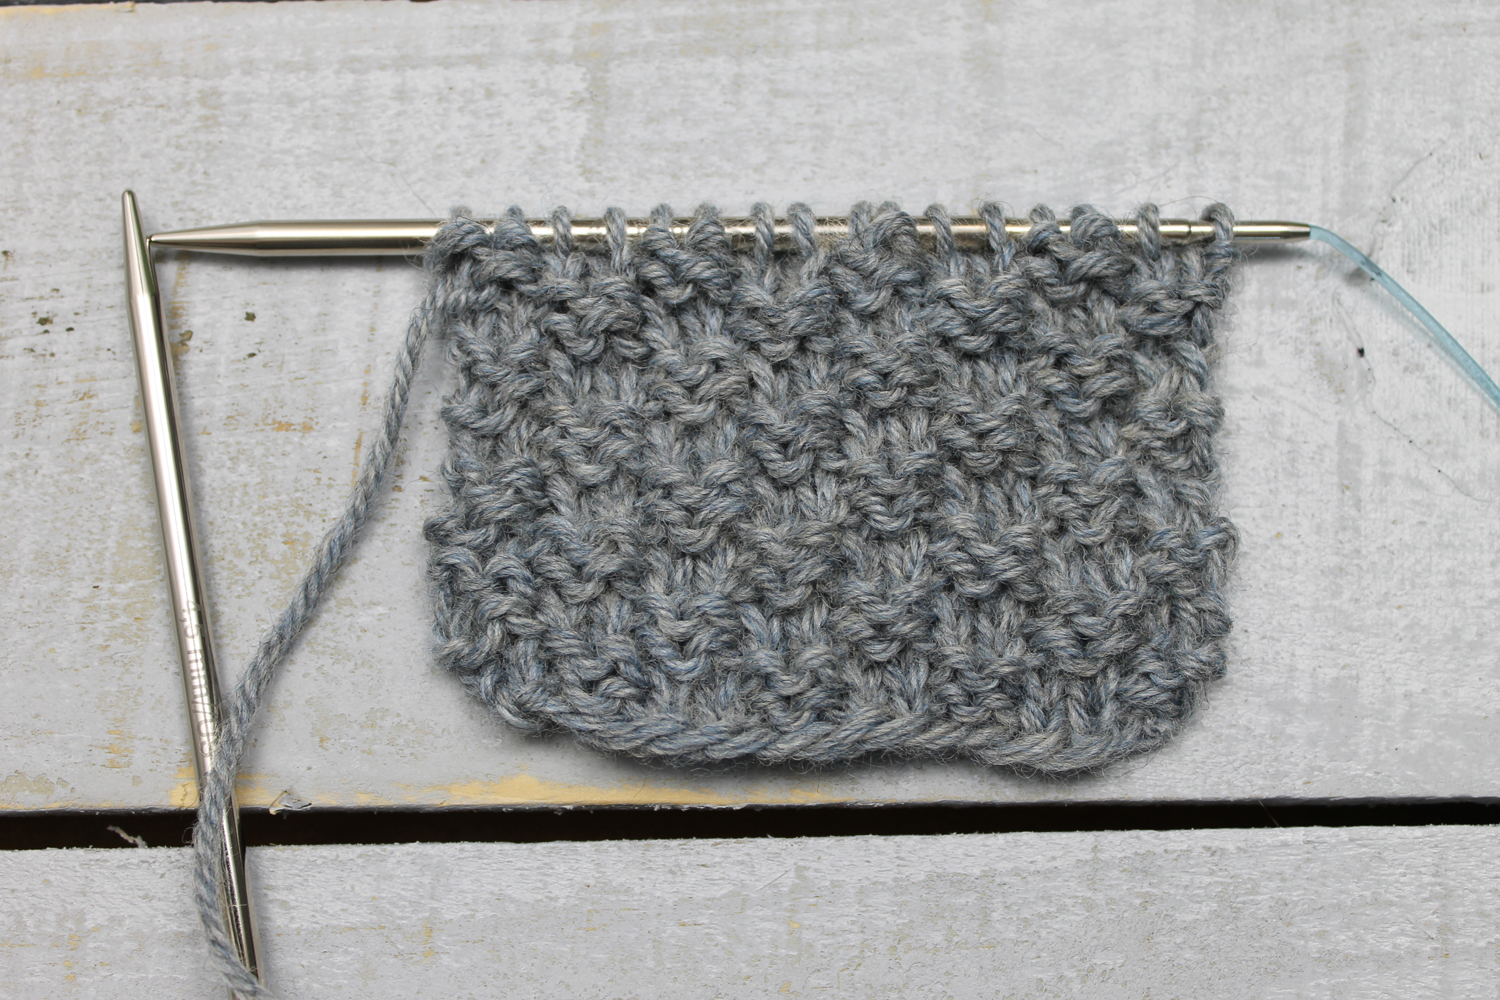 Moss Stitch Scarf Knitting Pattern How To Knit The Double Seed Stitch